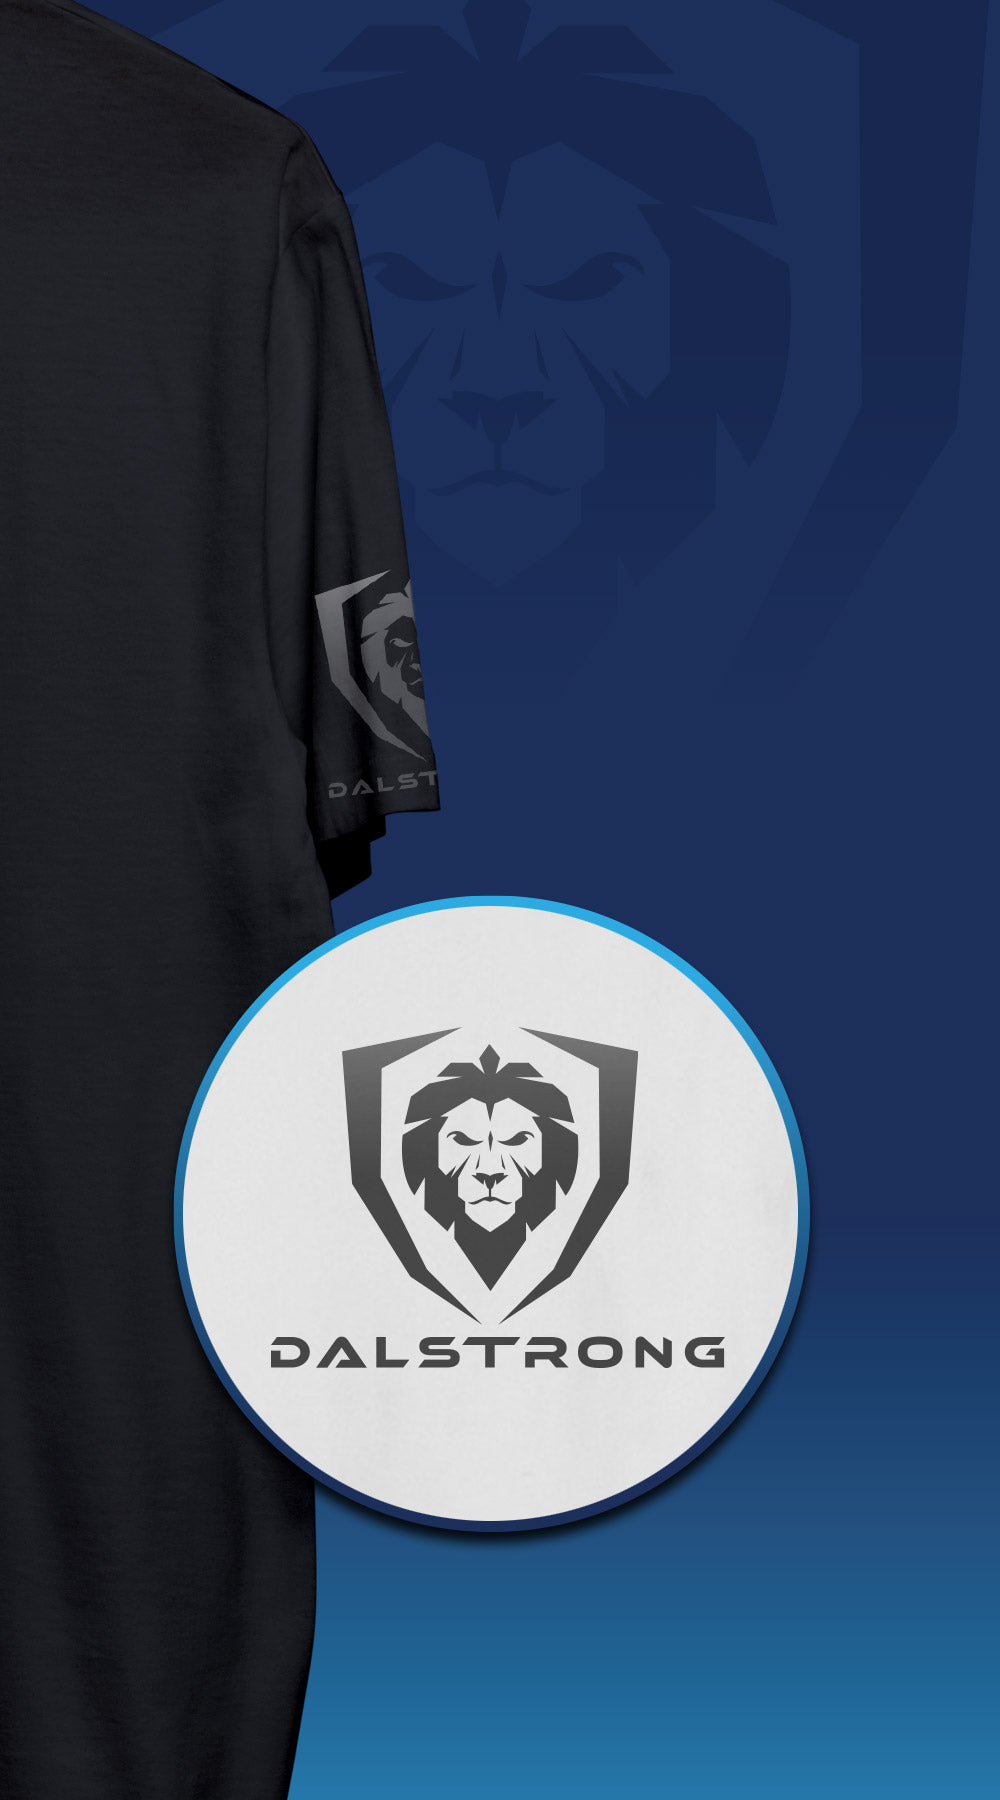 Dalstrong lionheart tee black with dalstrong name and logo.